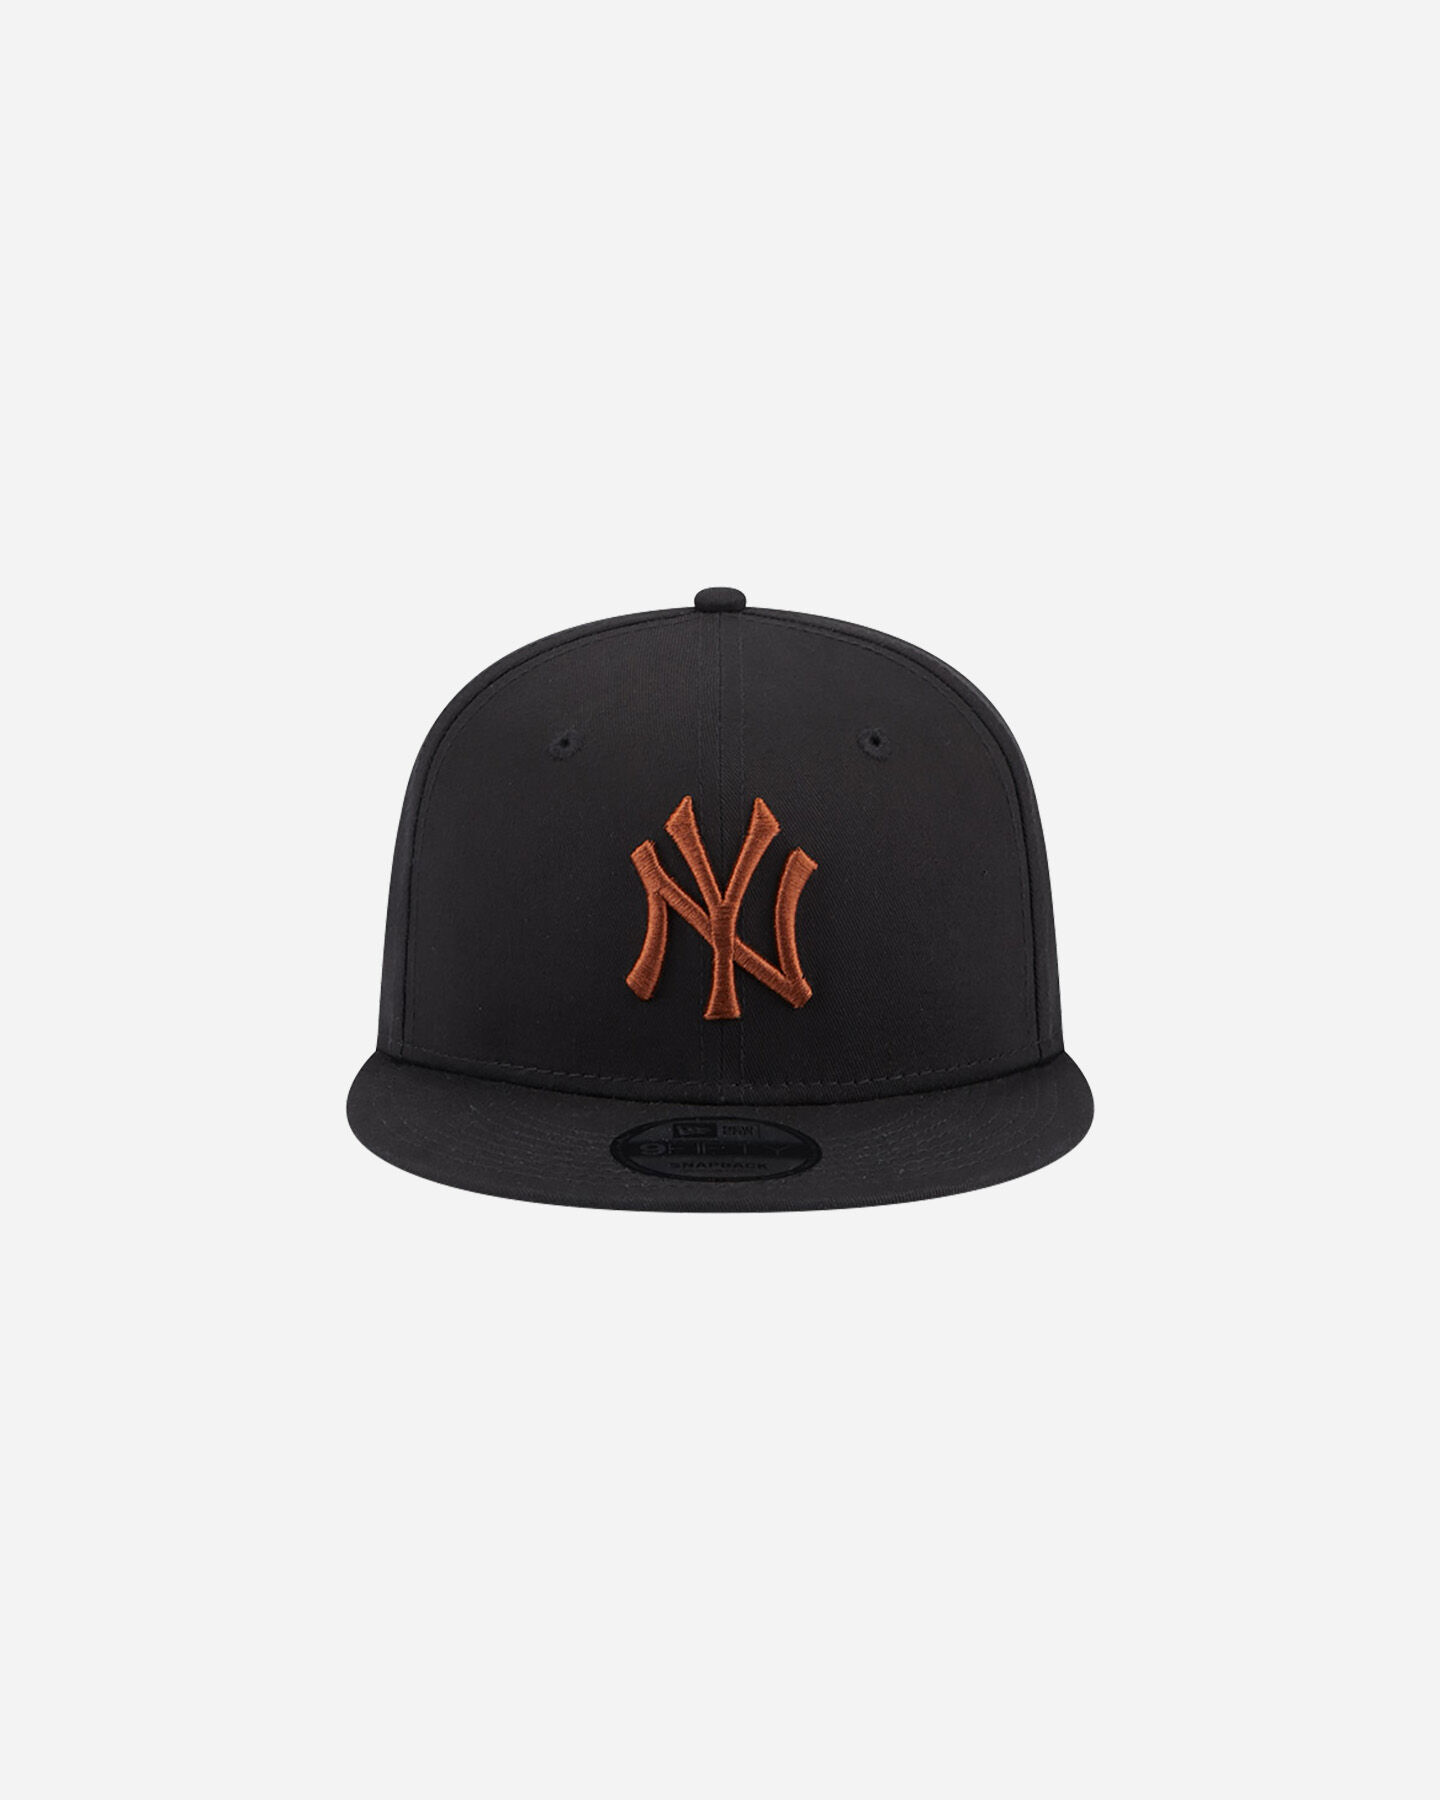  Cappellino NEW ERA 9FIFTY MLB LEAGUE NEW YORK YANKEES  S5606265|001|SM scatto 1